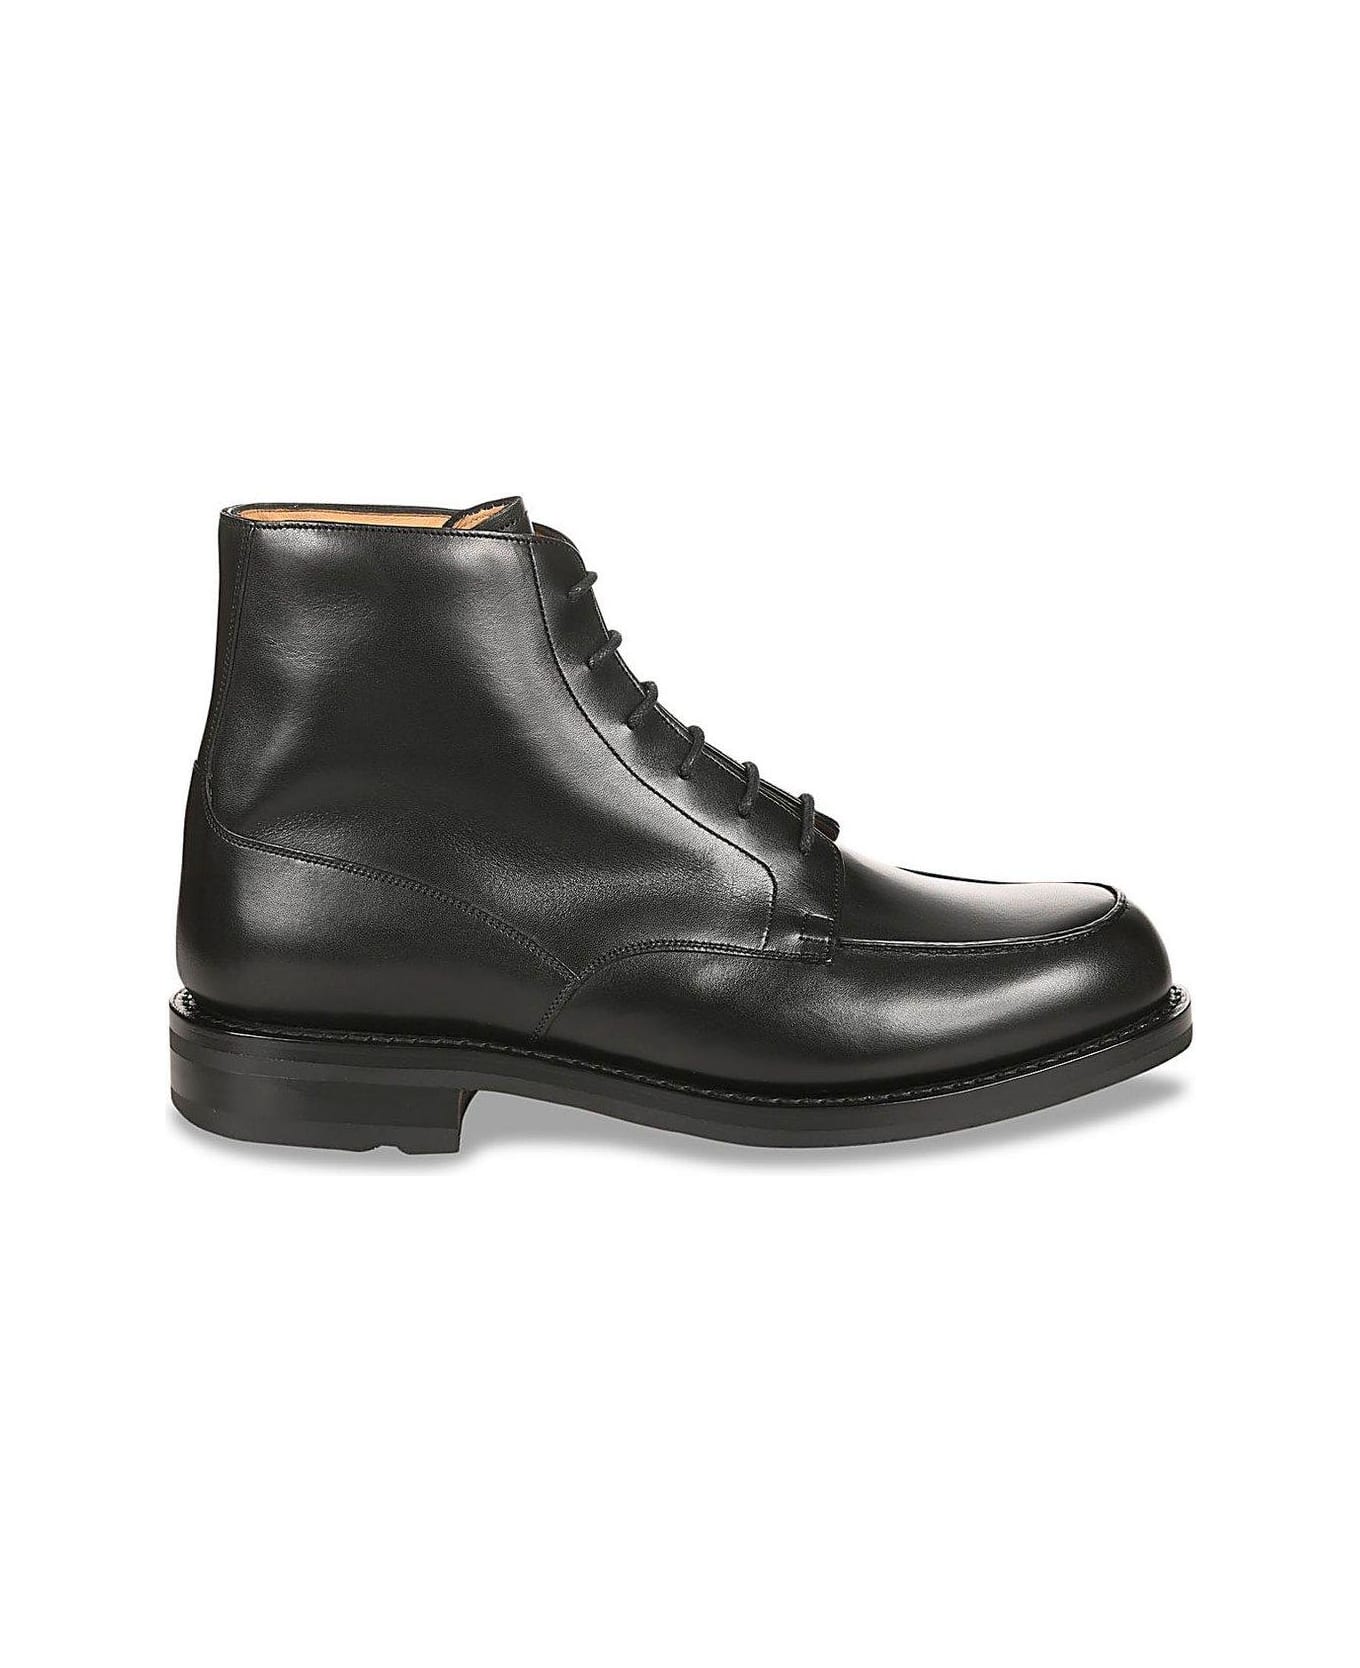 Church's Round-toe Lace-up Ankle Boots - Nero